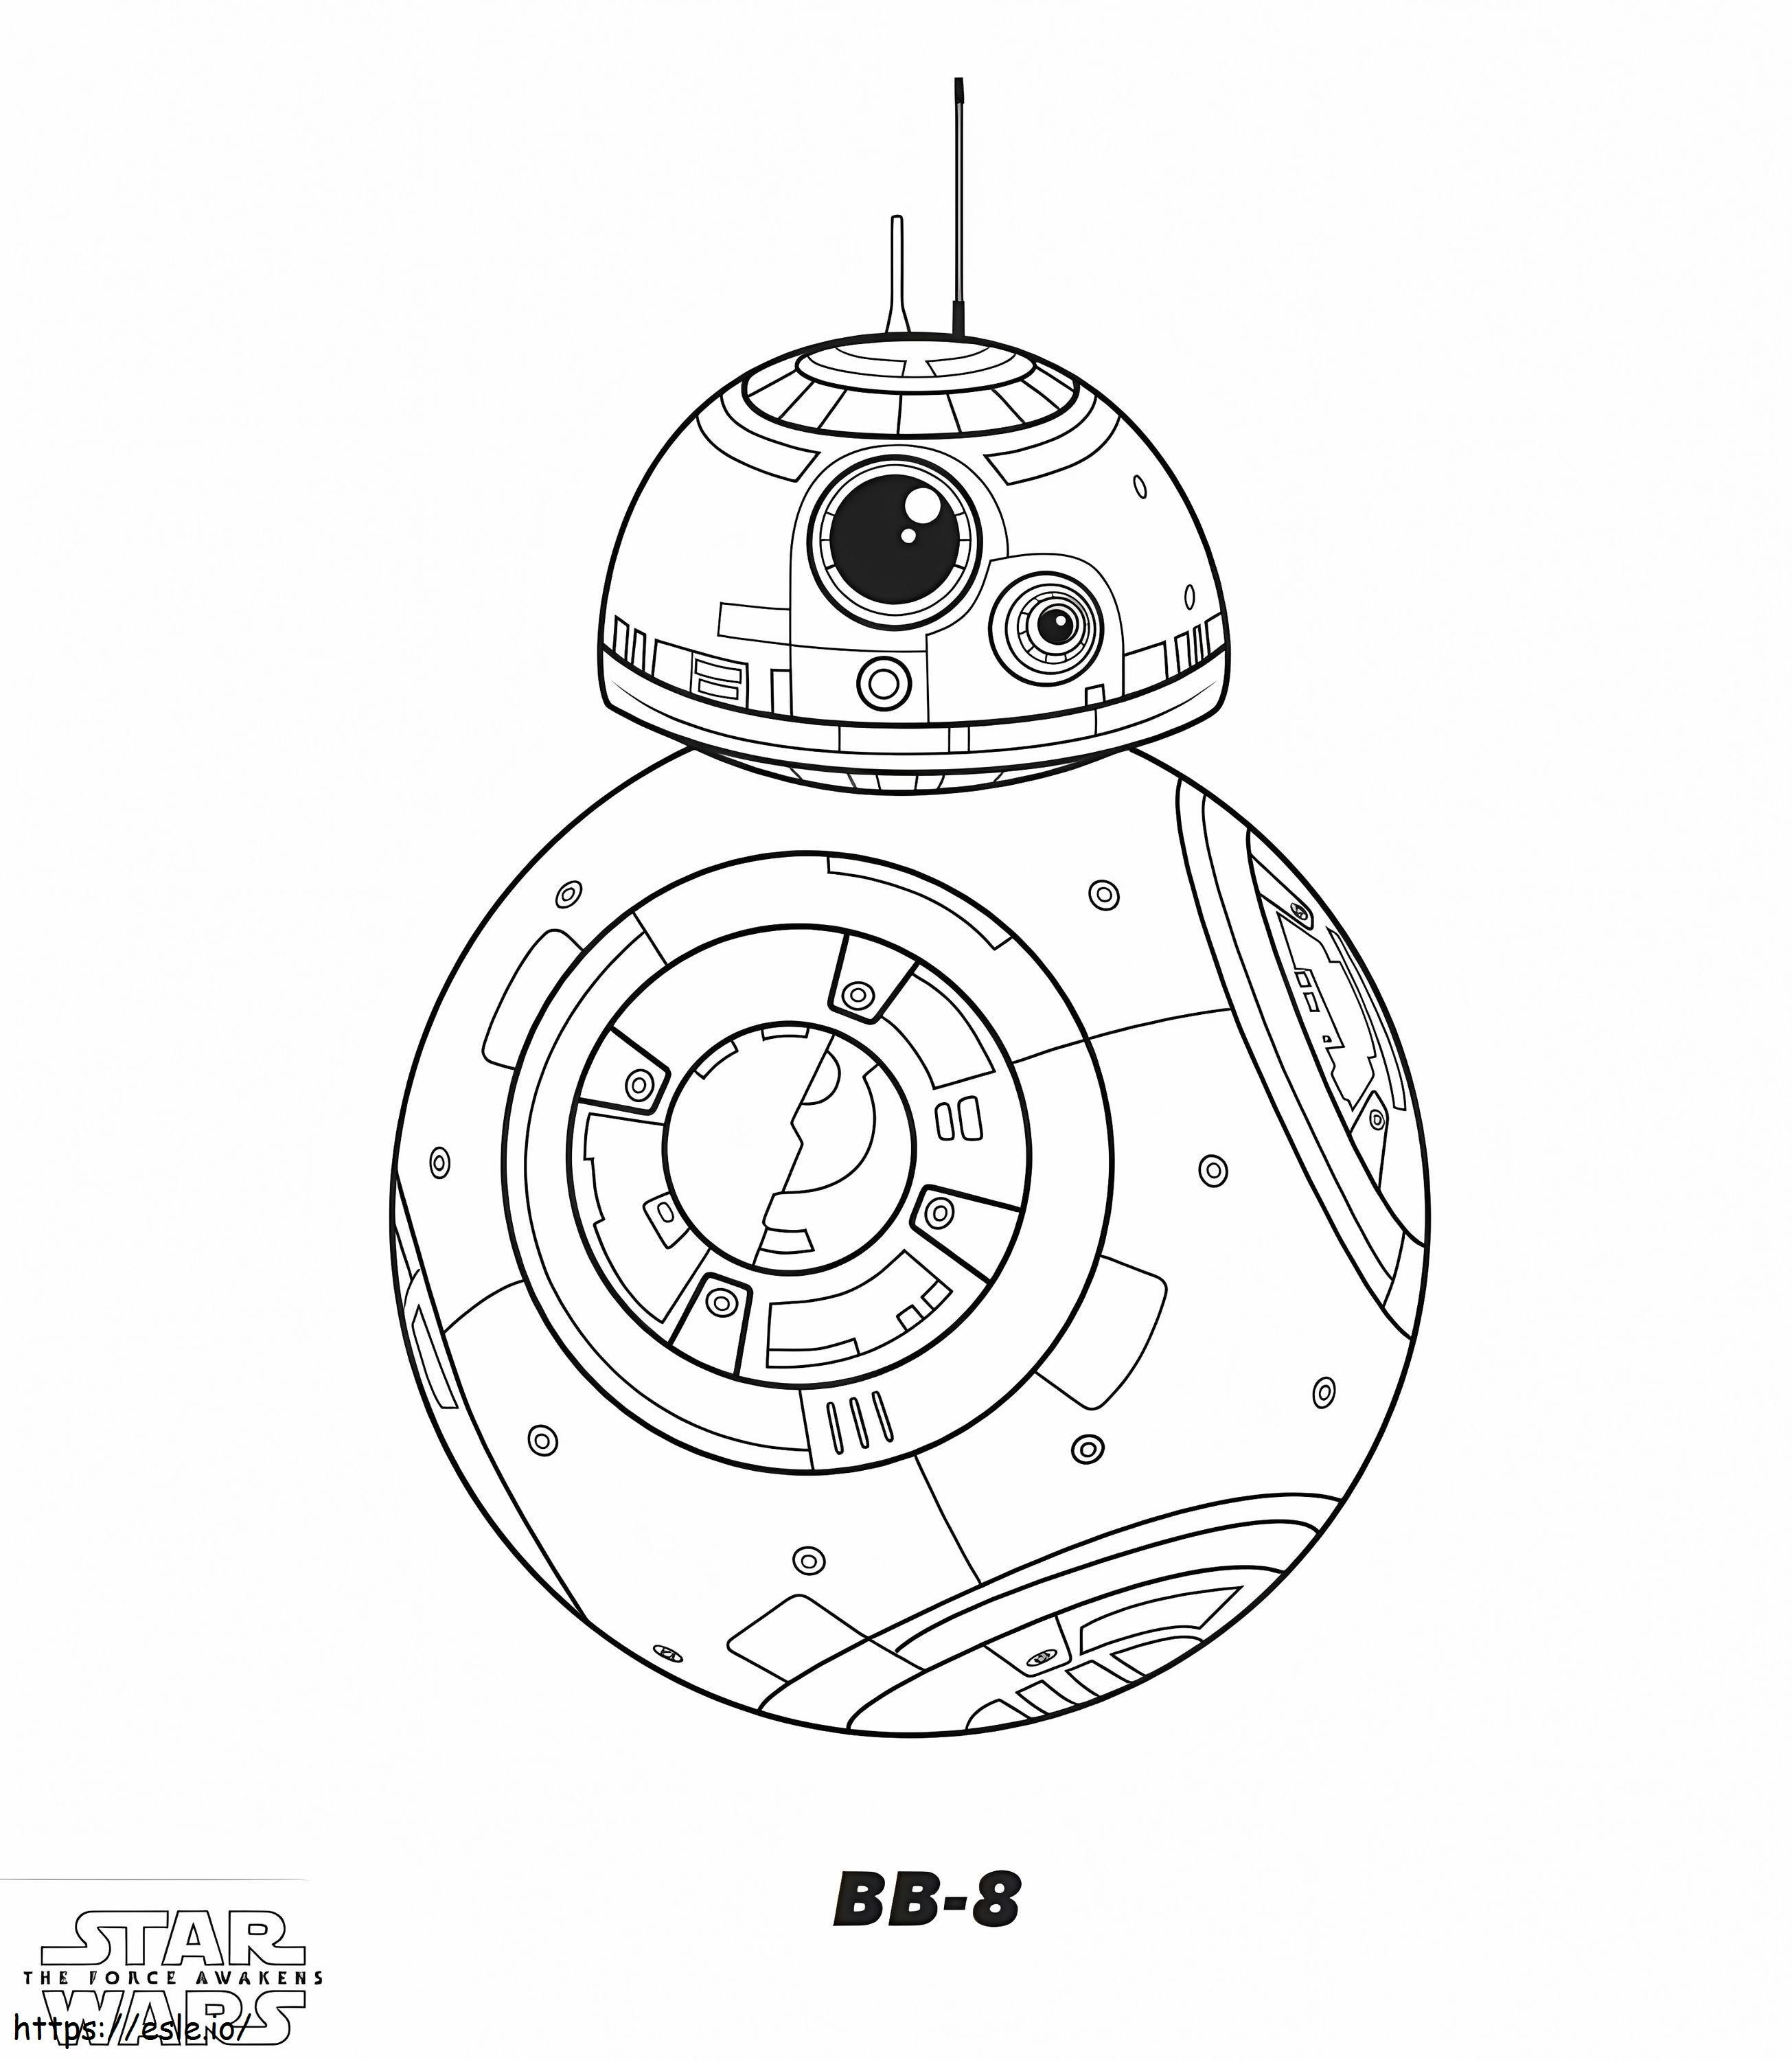 BB 8 Droid coloring page